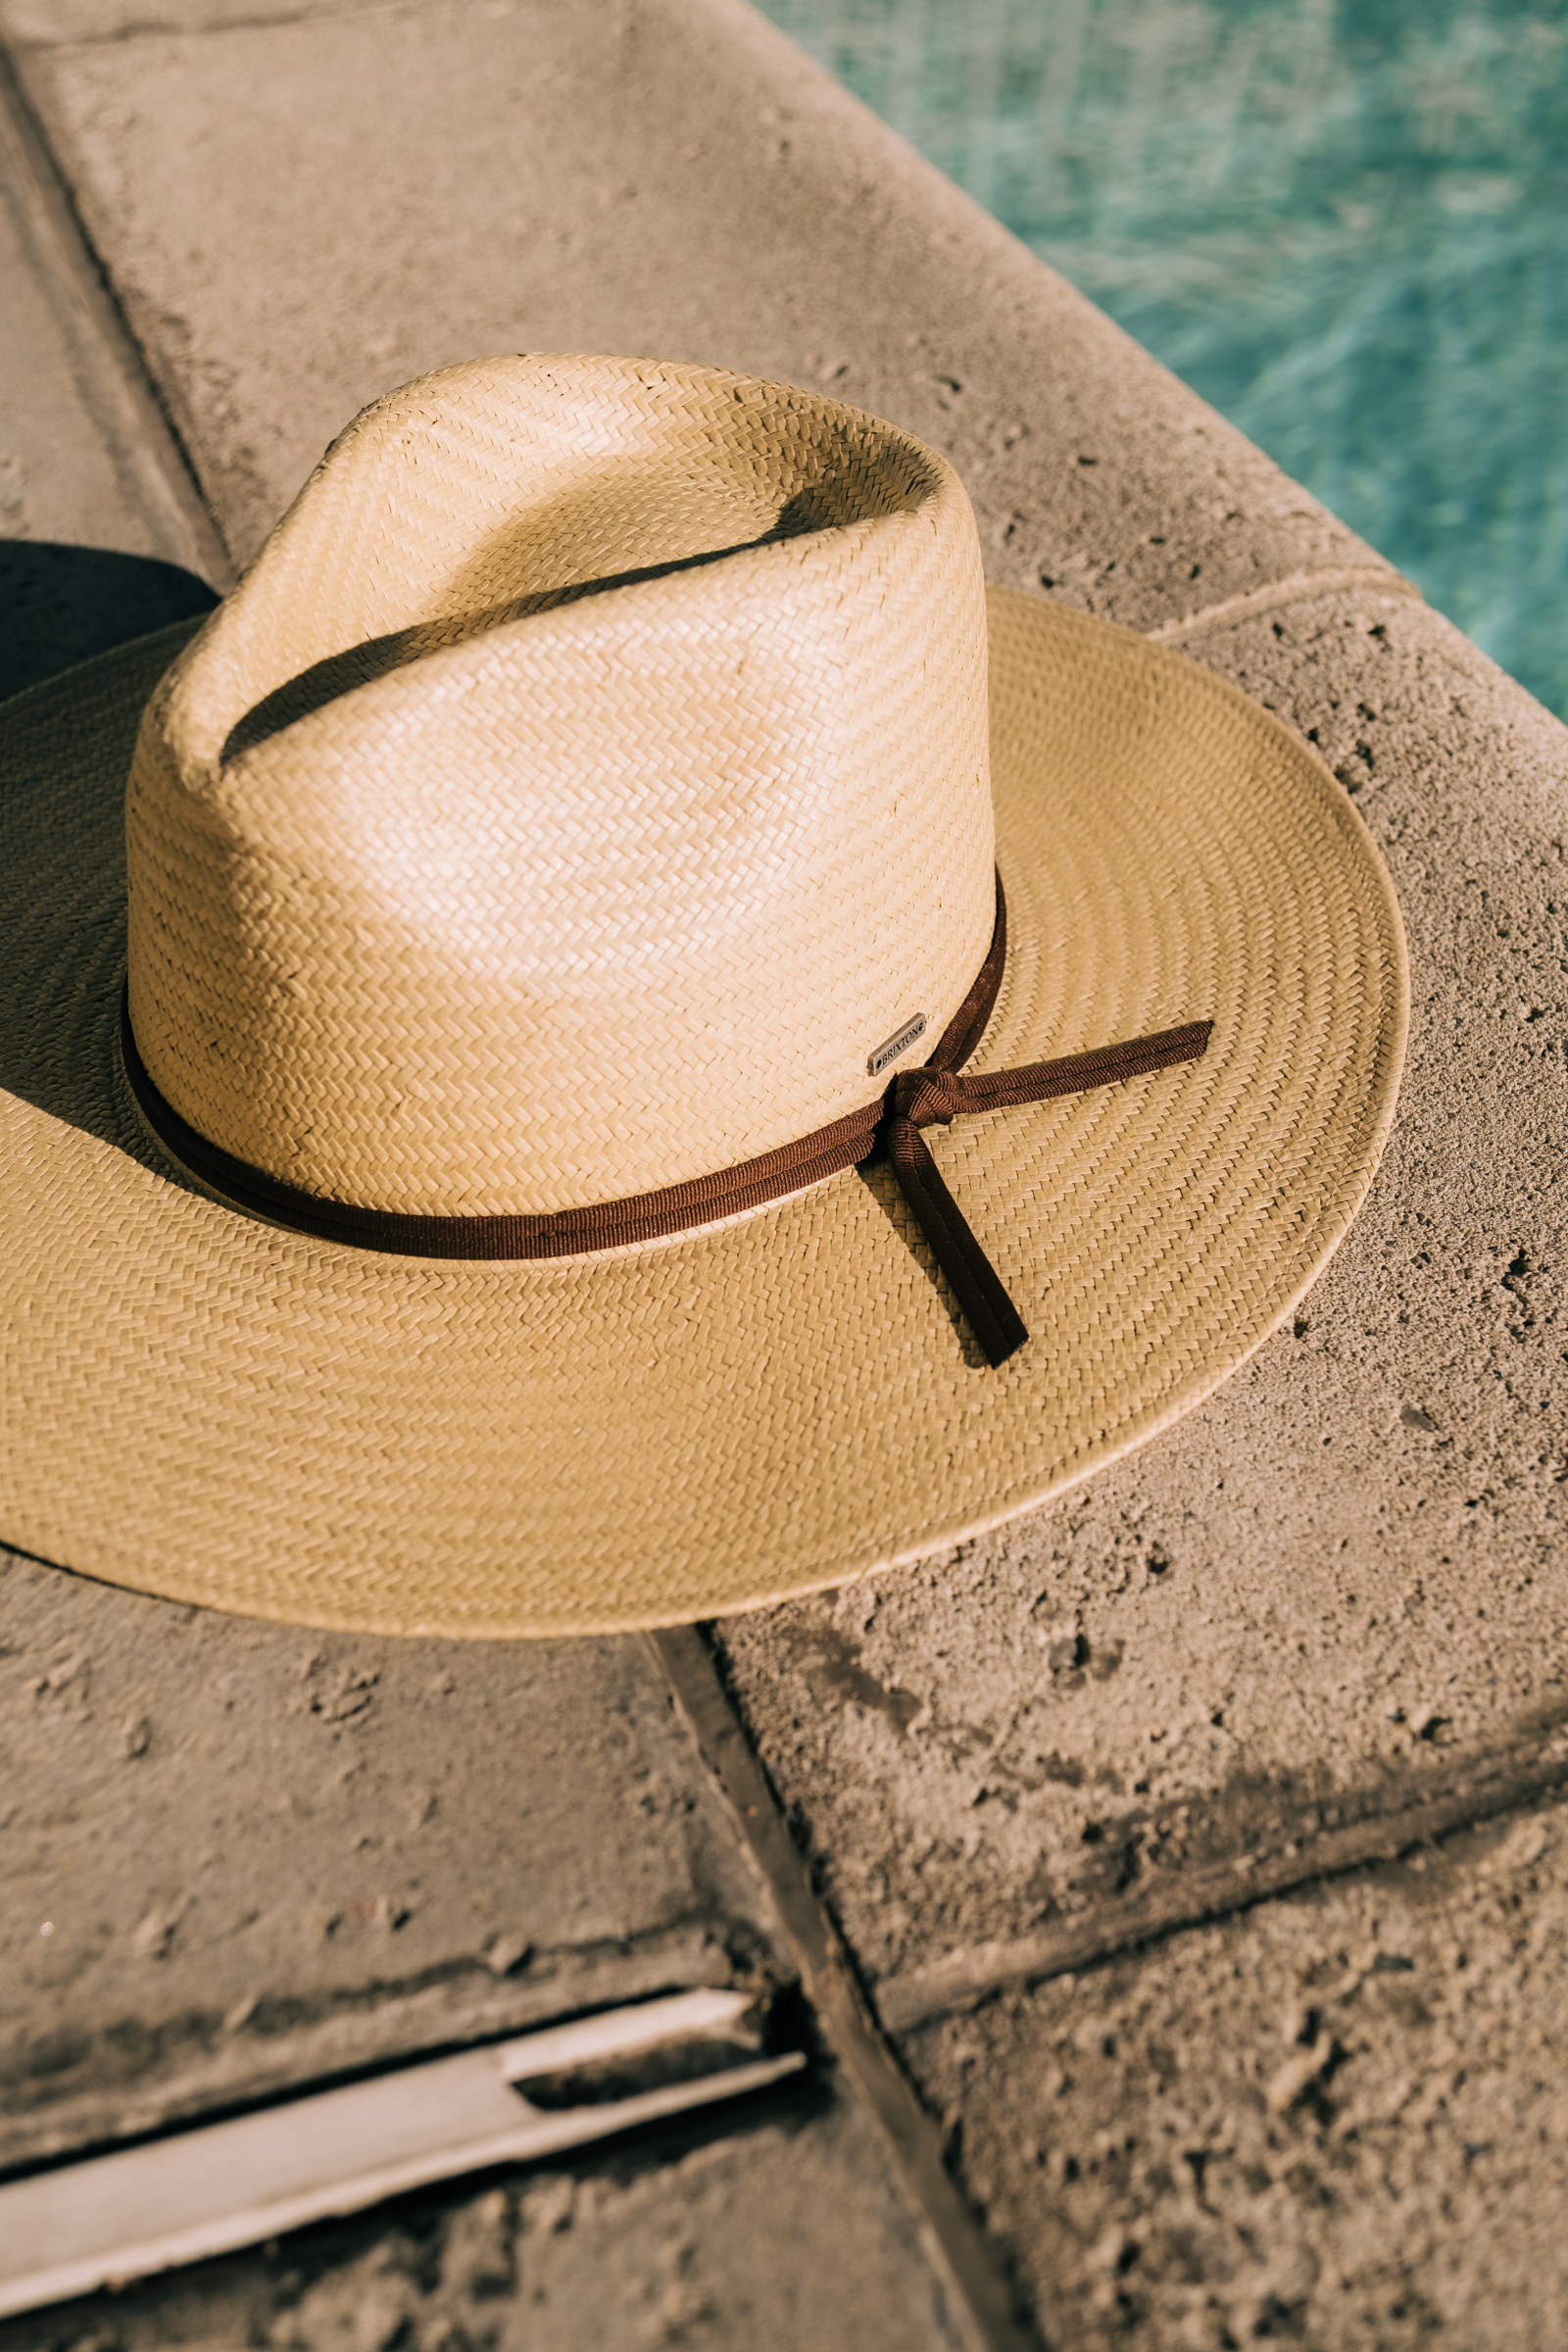 Brixton hat by the pool